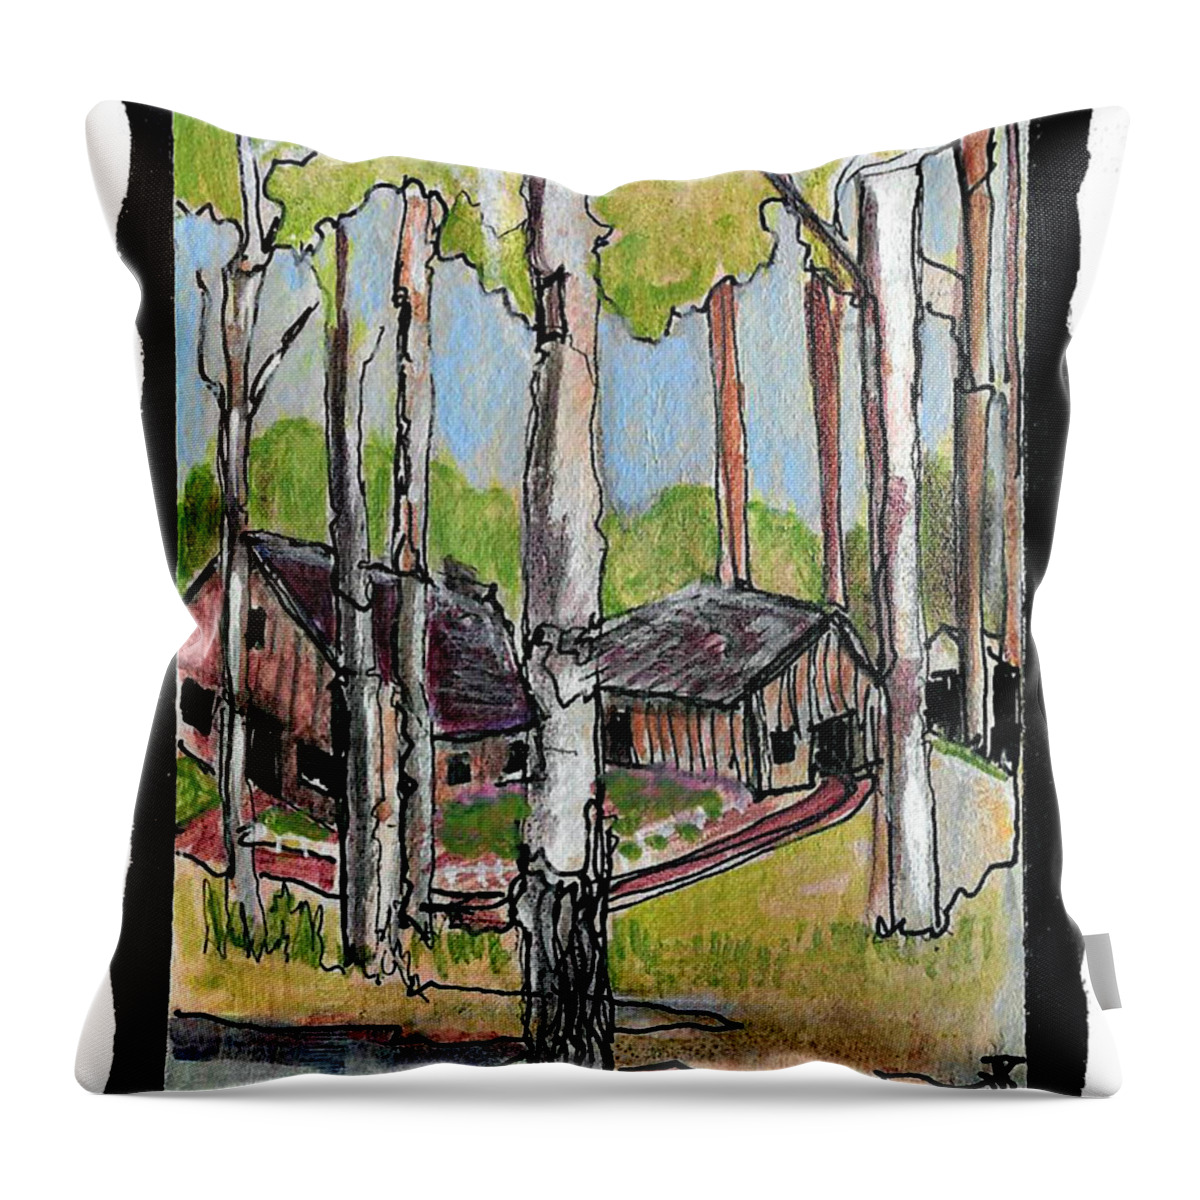 Cabins Throw Pillow featuring the painting C8 by Brenda L Baker